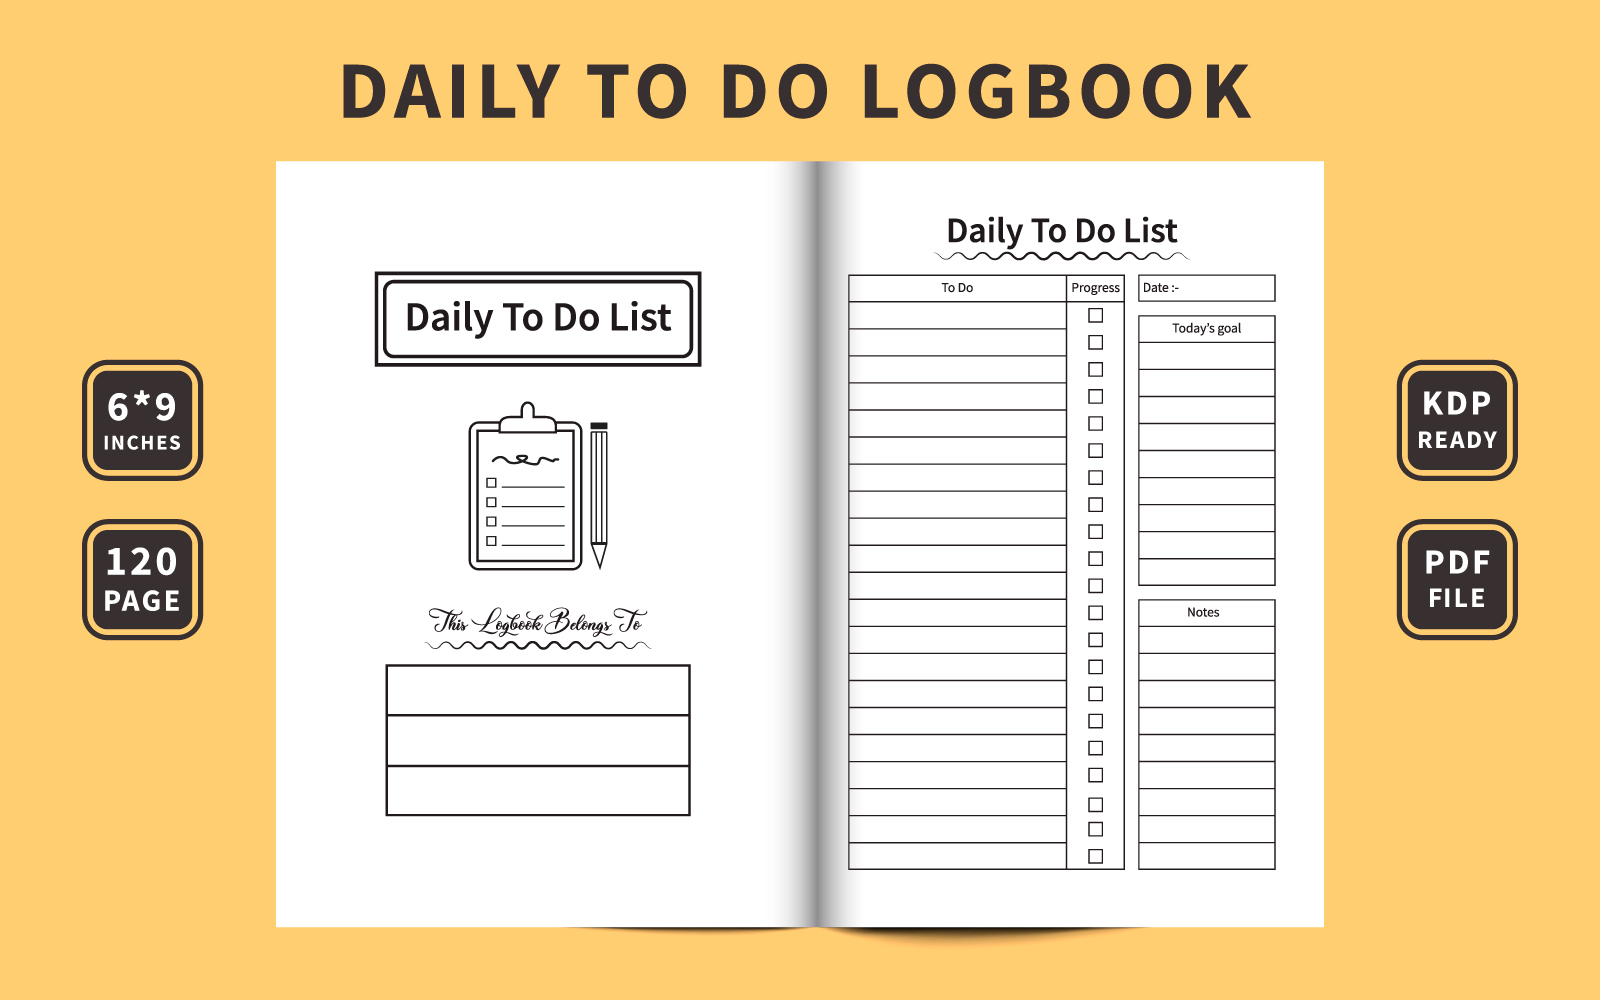 Daily worklist and task progress log book vector